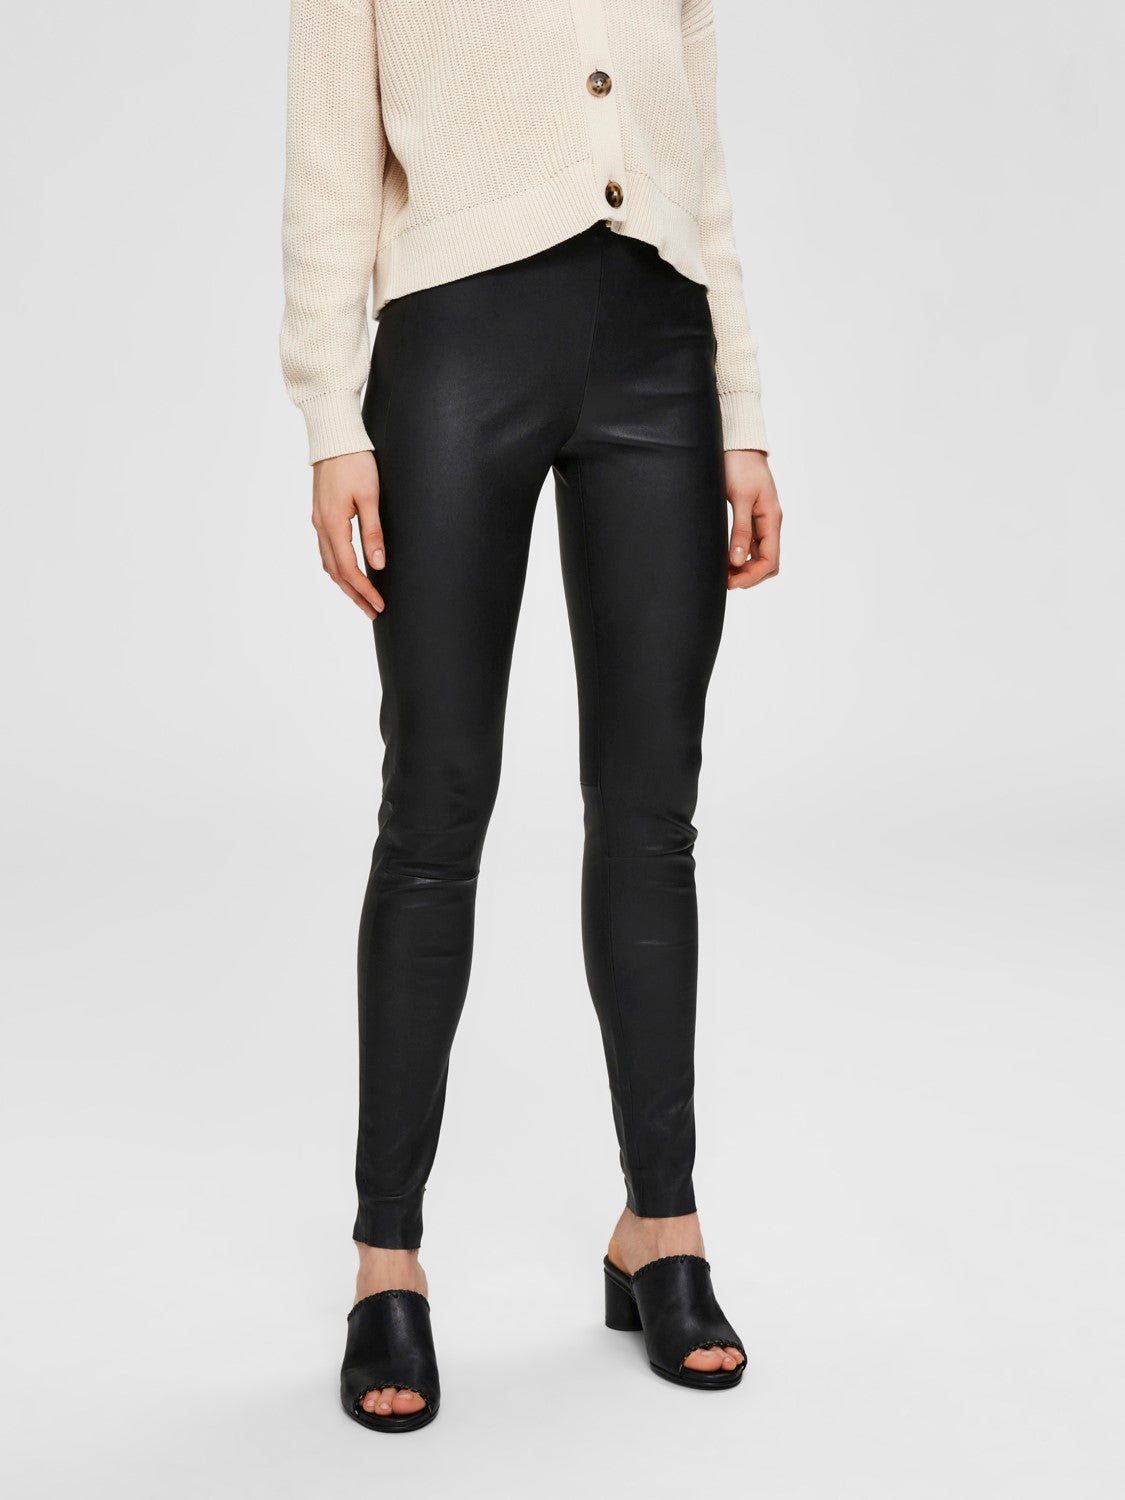 Stretch Leather Leggings - Selected Femme